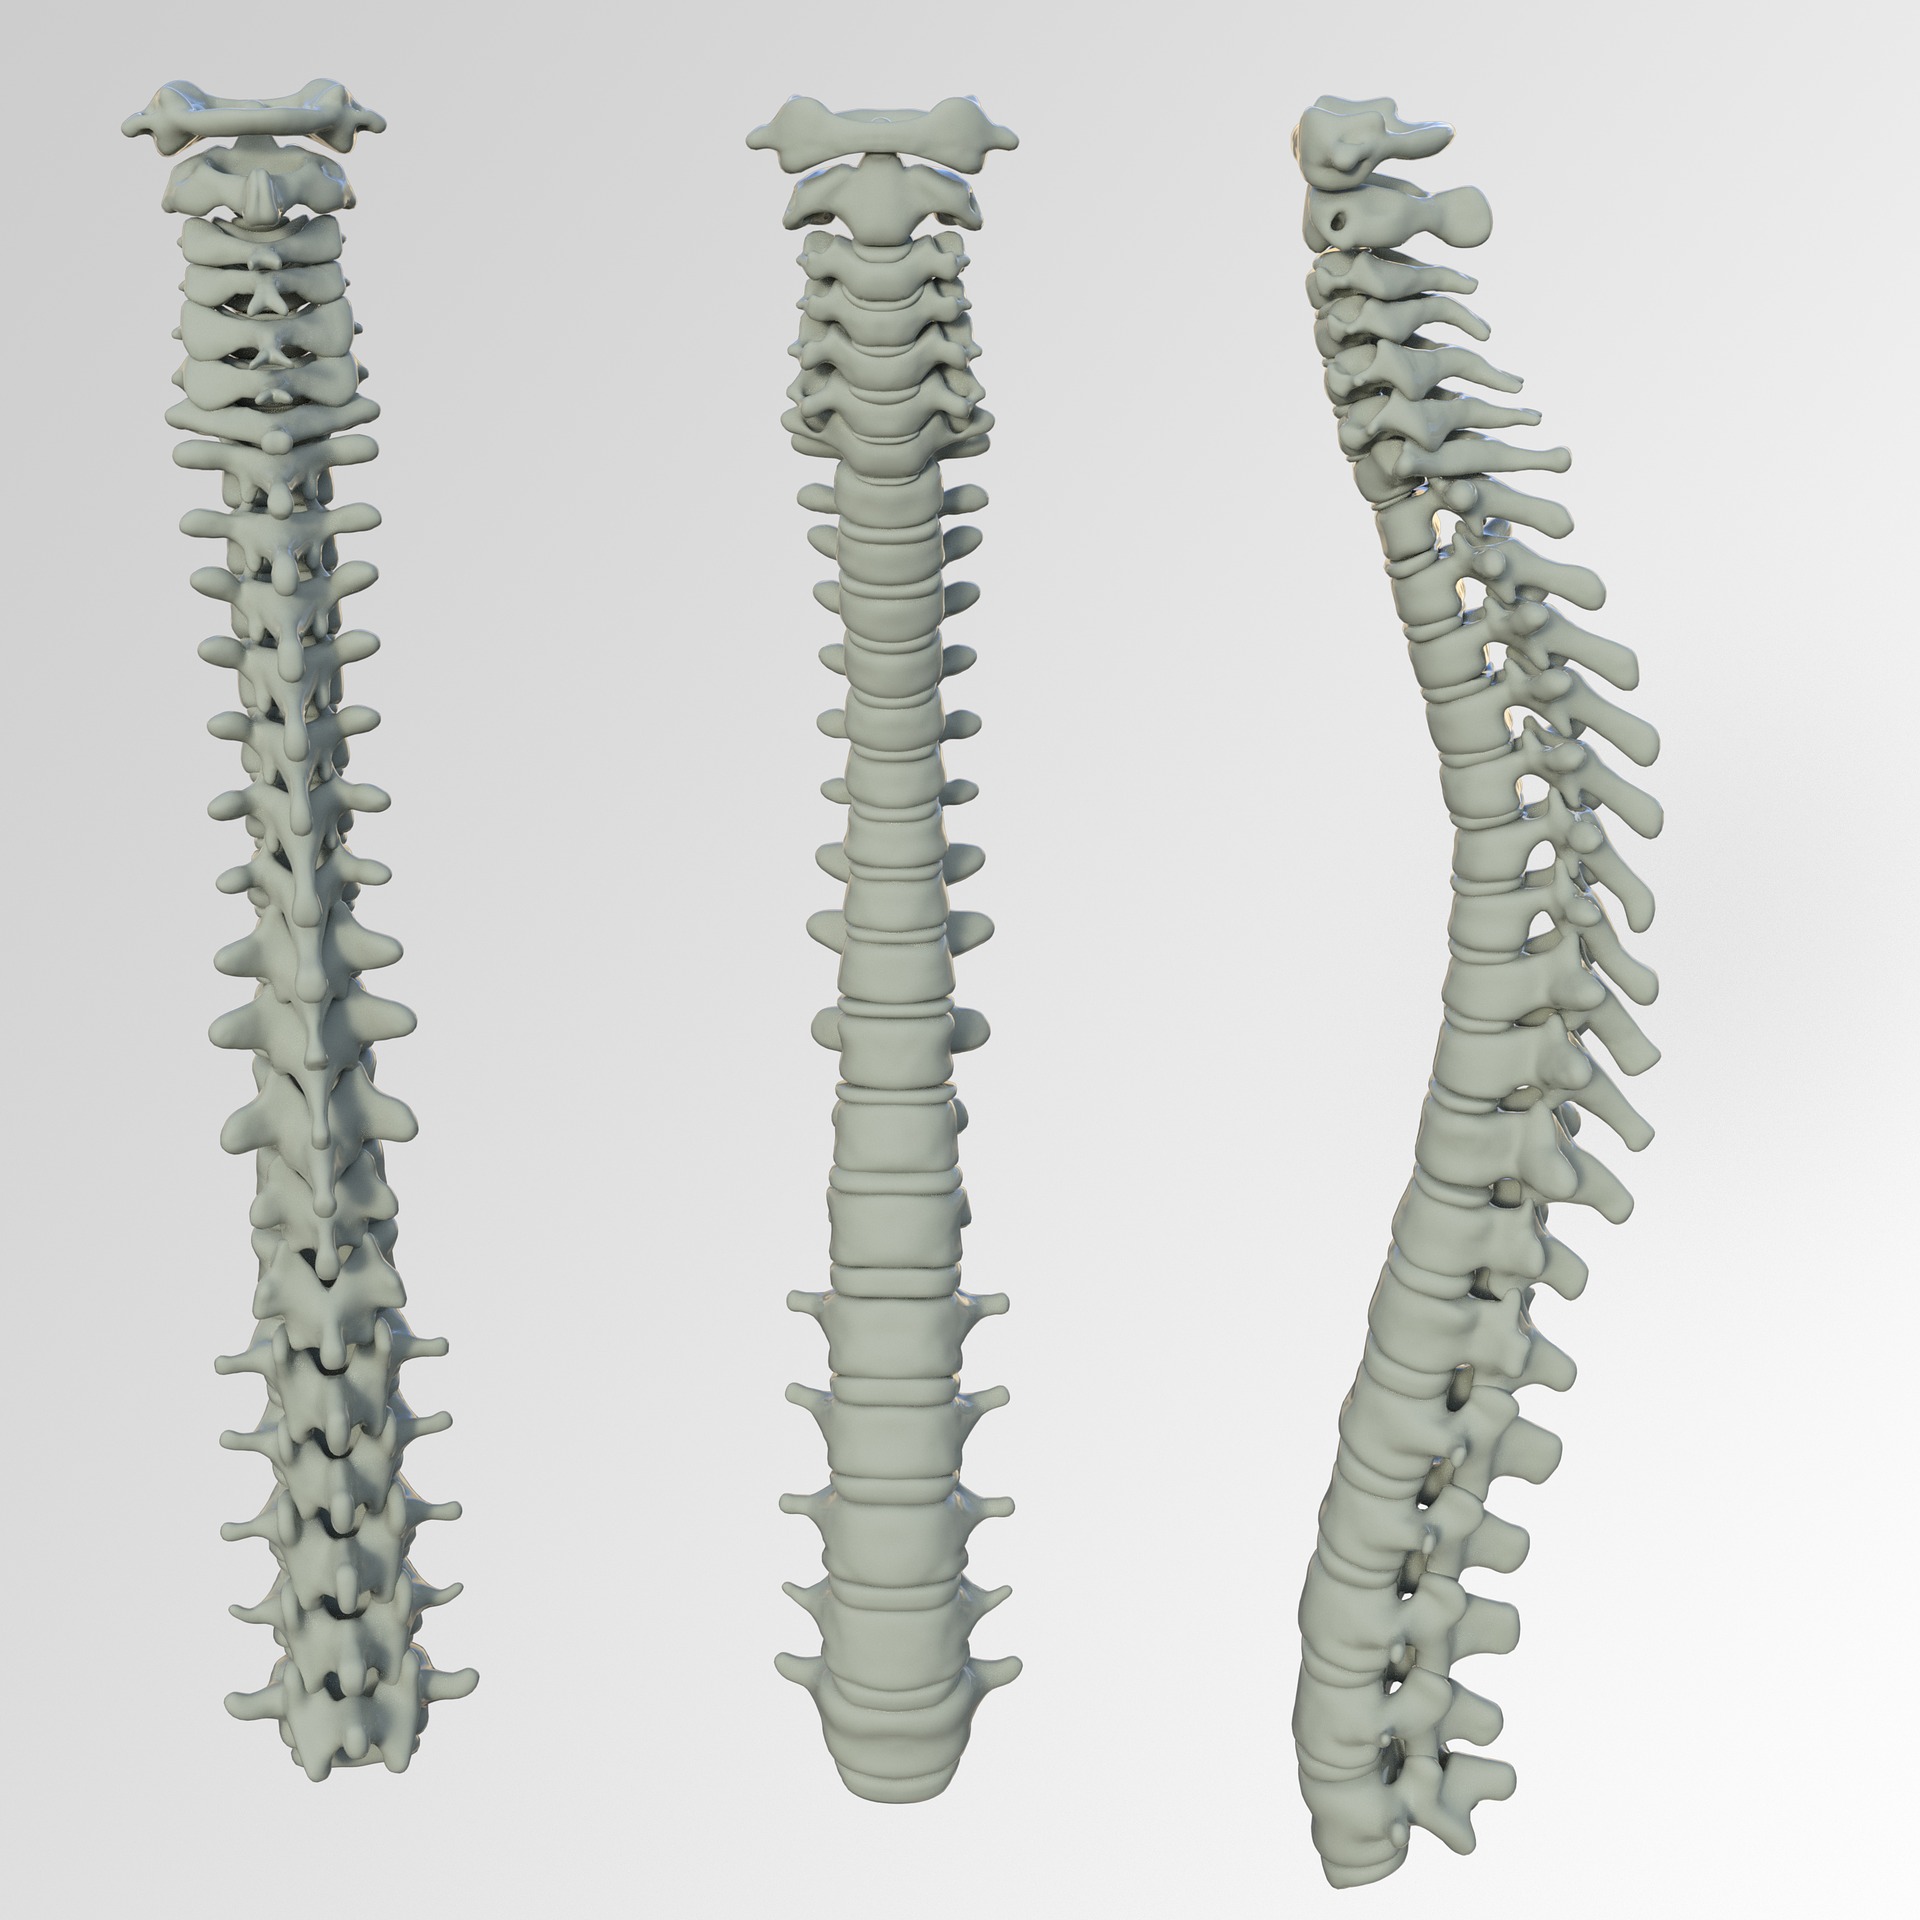 Mexico spinal implants market